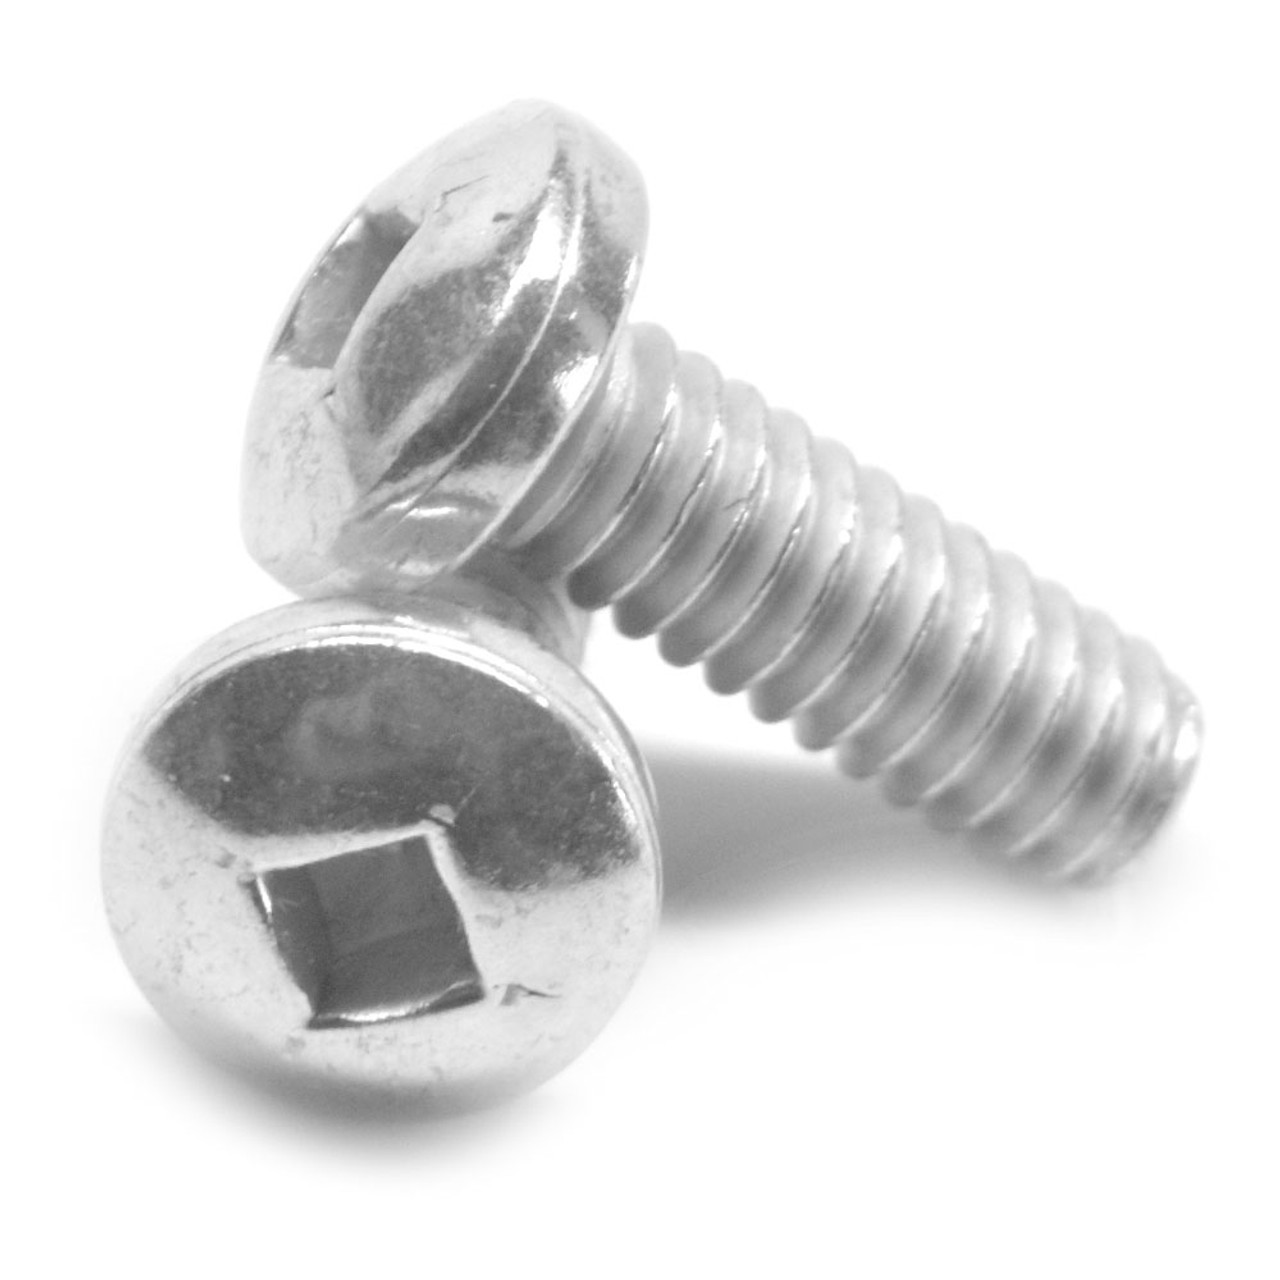 #10-24 x 1/2" (FT) Coarse Thread Machine Screw Square Drive Pan Head Stainless Steel 18-8